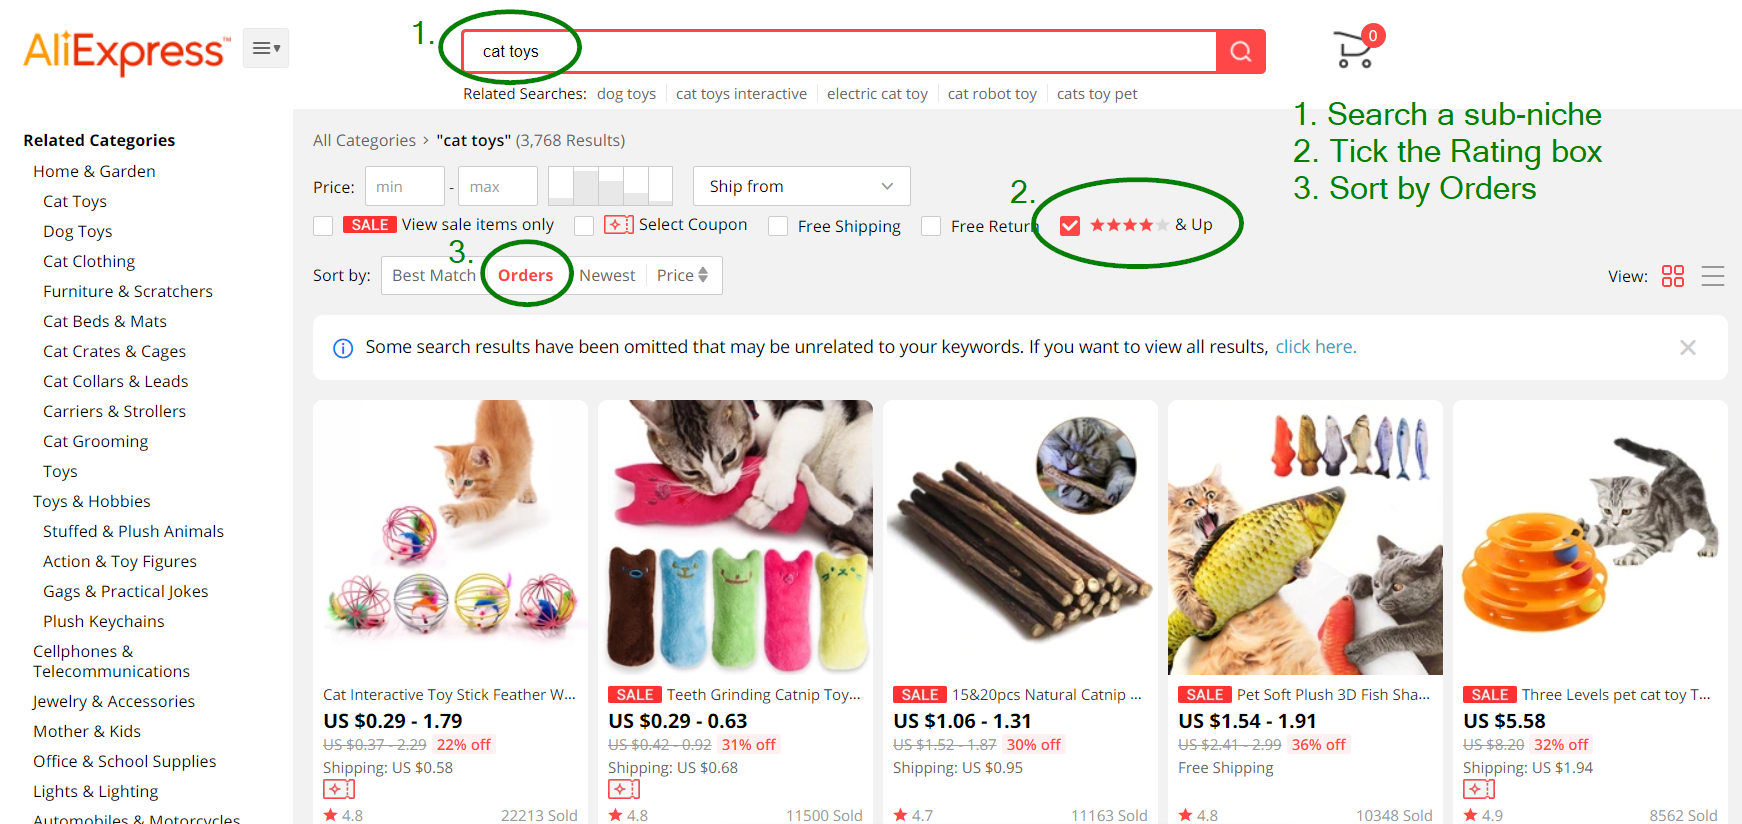 An example of searching and sorting products on AliExpress.